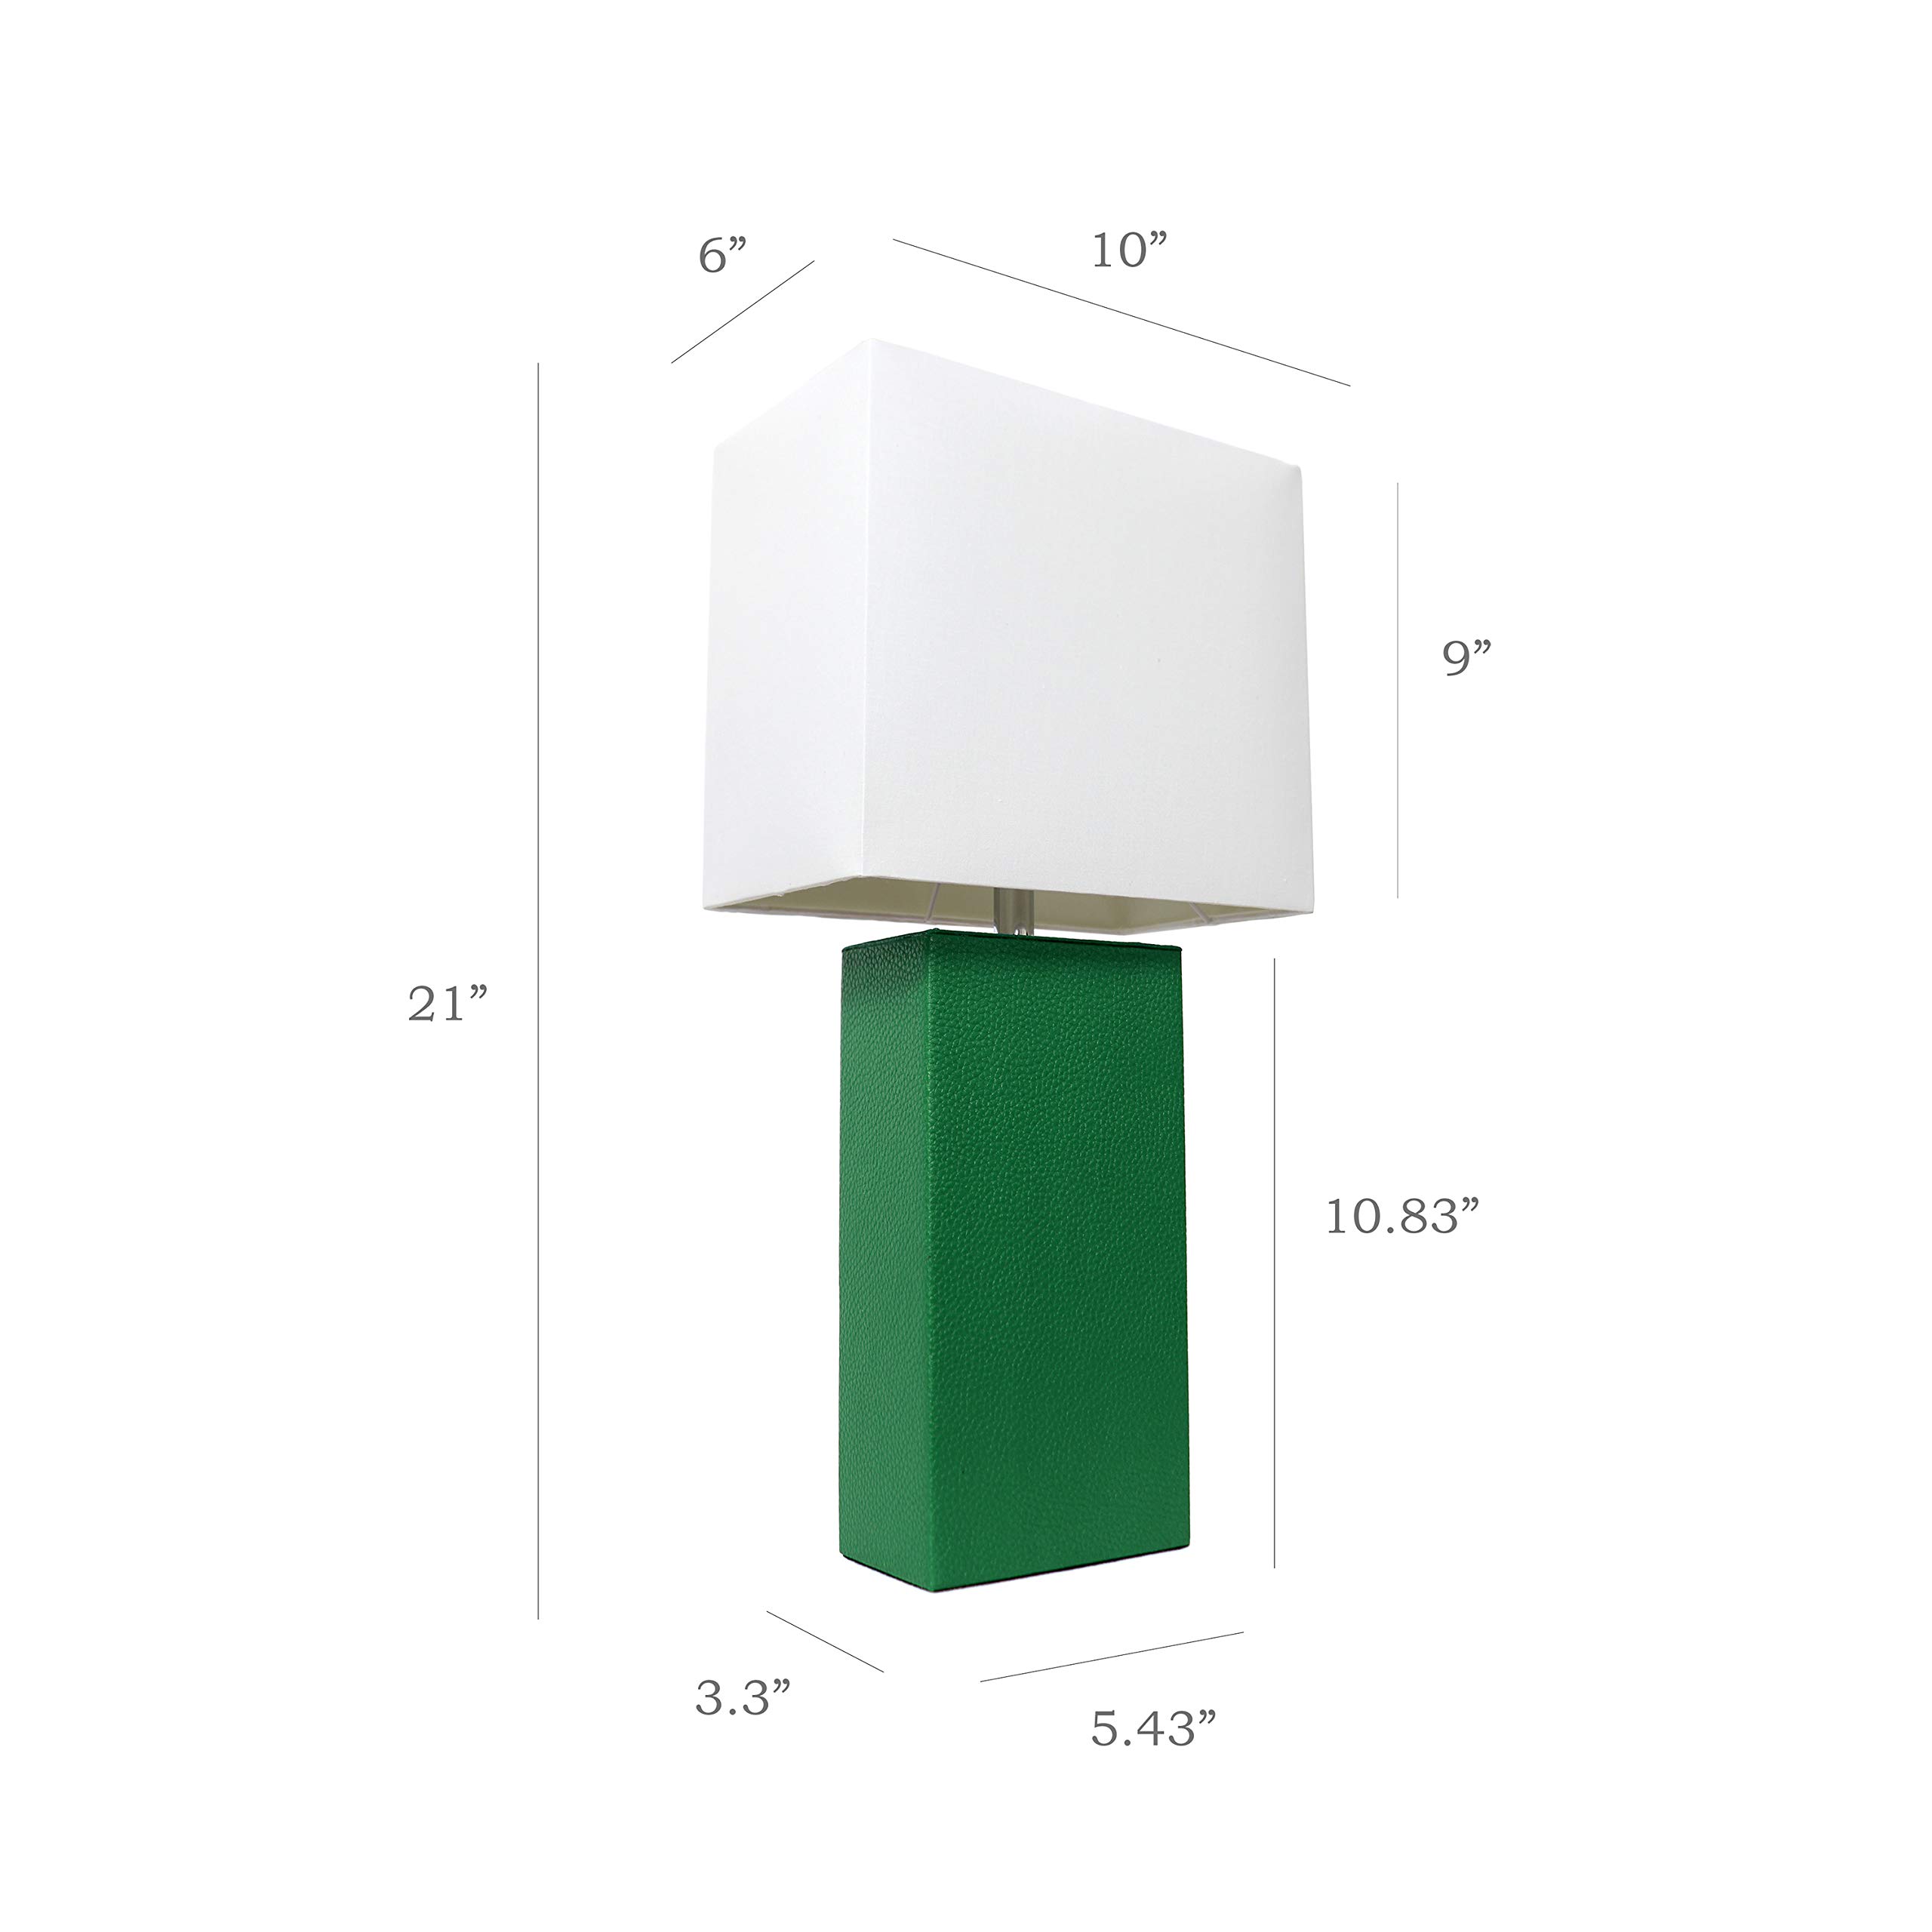 Elegant Designs LT1025-GRN Modern Genuine Leather Table Lamp with White Fabric Shade, Green-(Pack of 4)